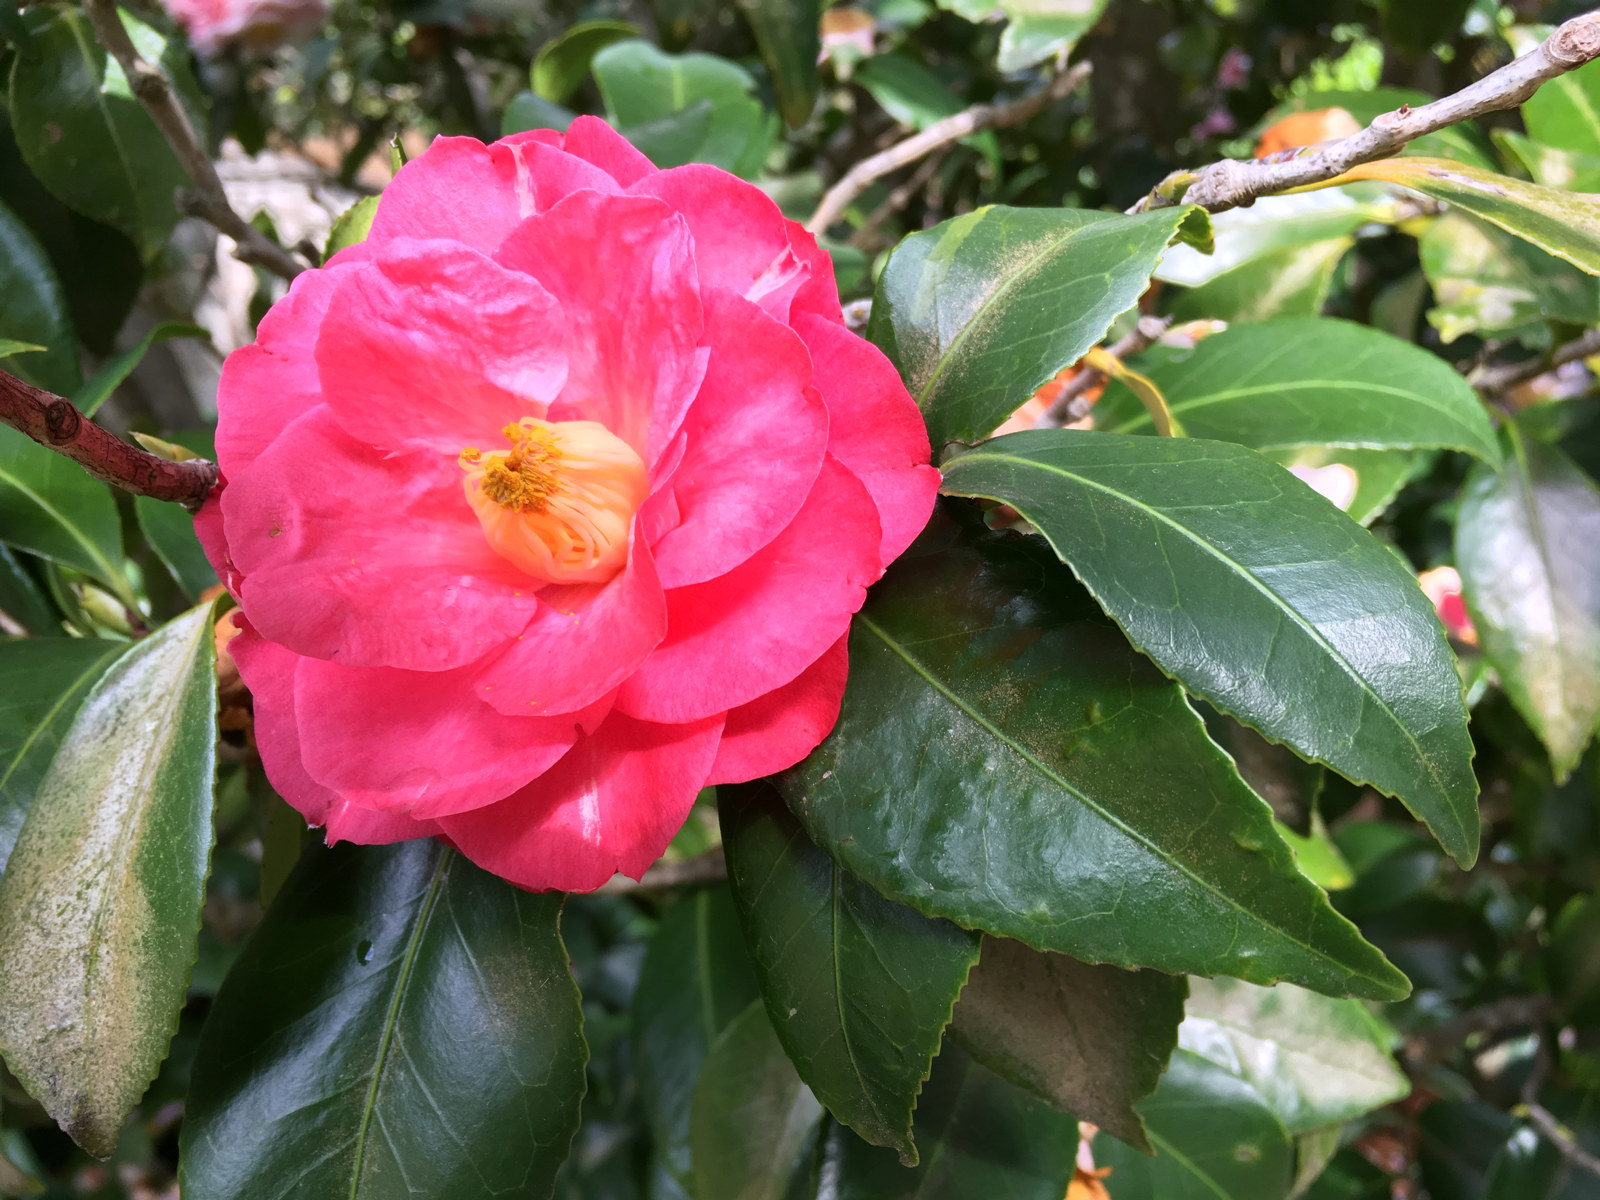 the flower of Camellia japonica 'Jean Lyne' at Vaucluse house